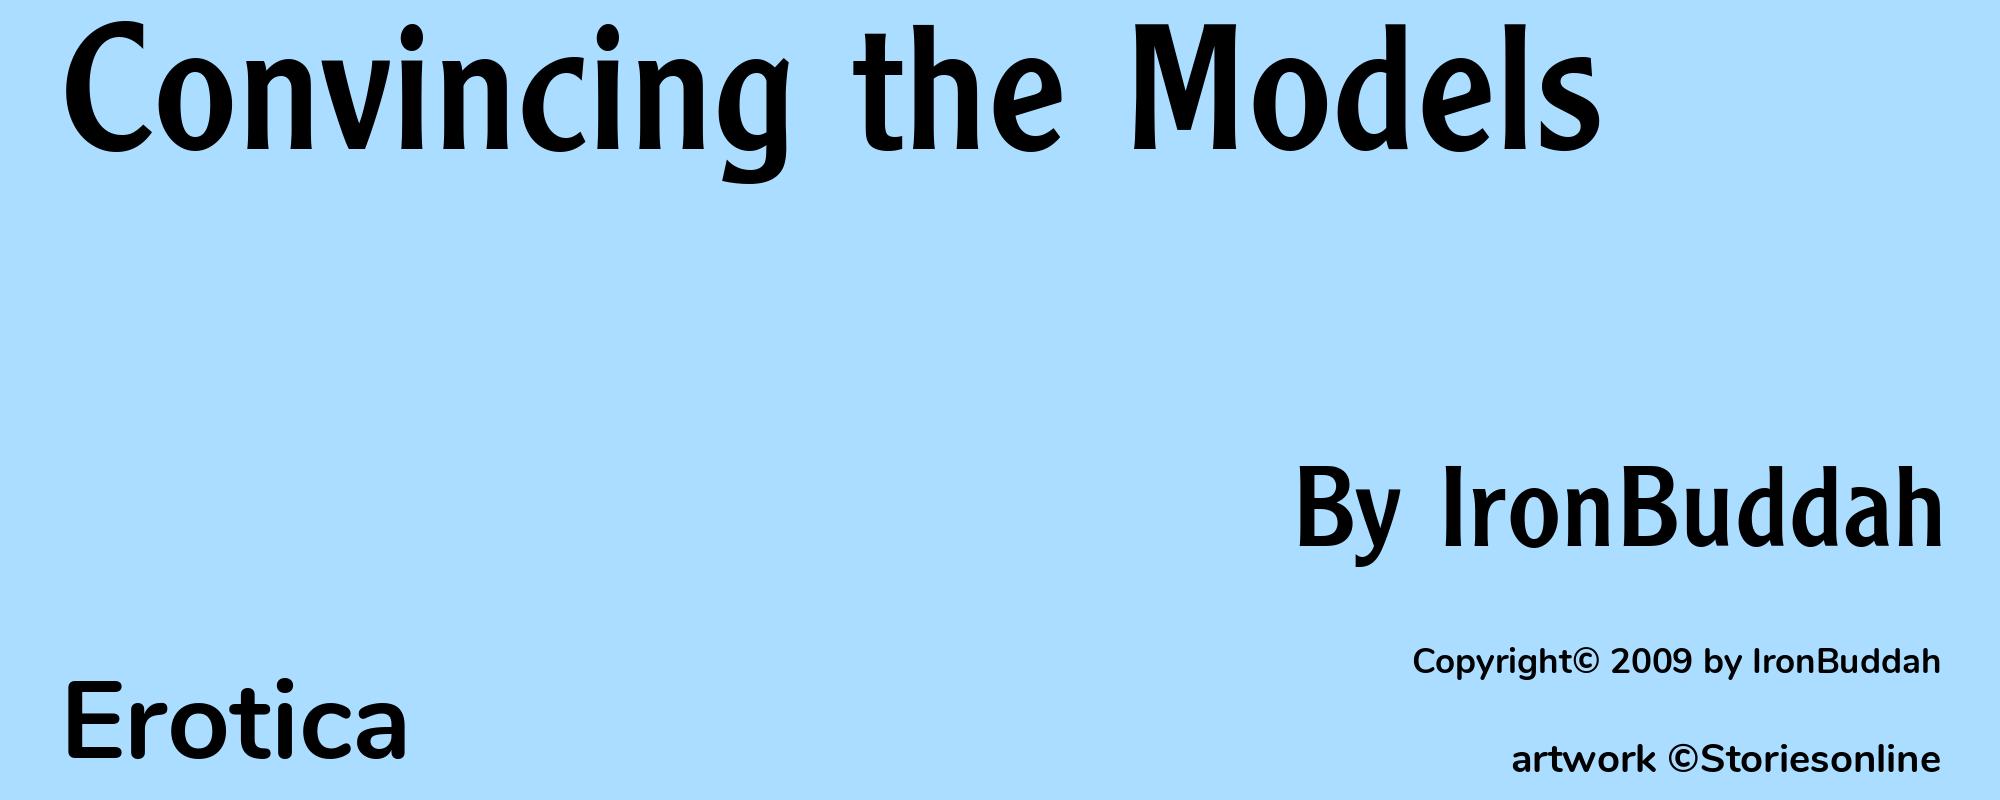 Convincing the Models - Cover